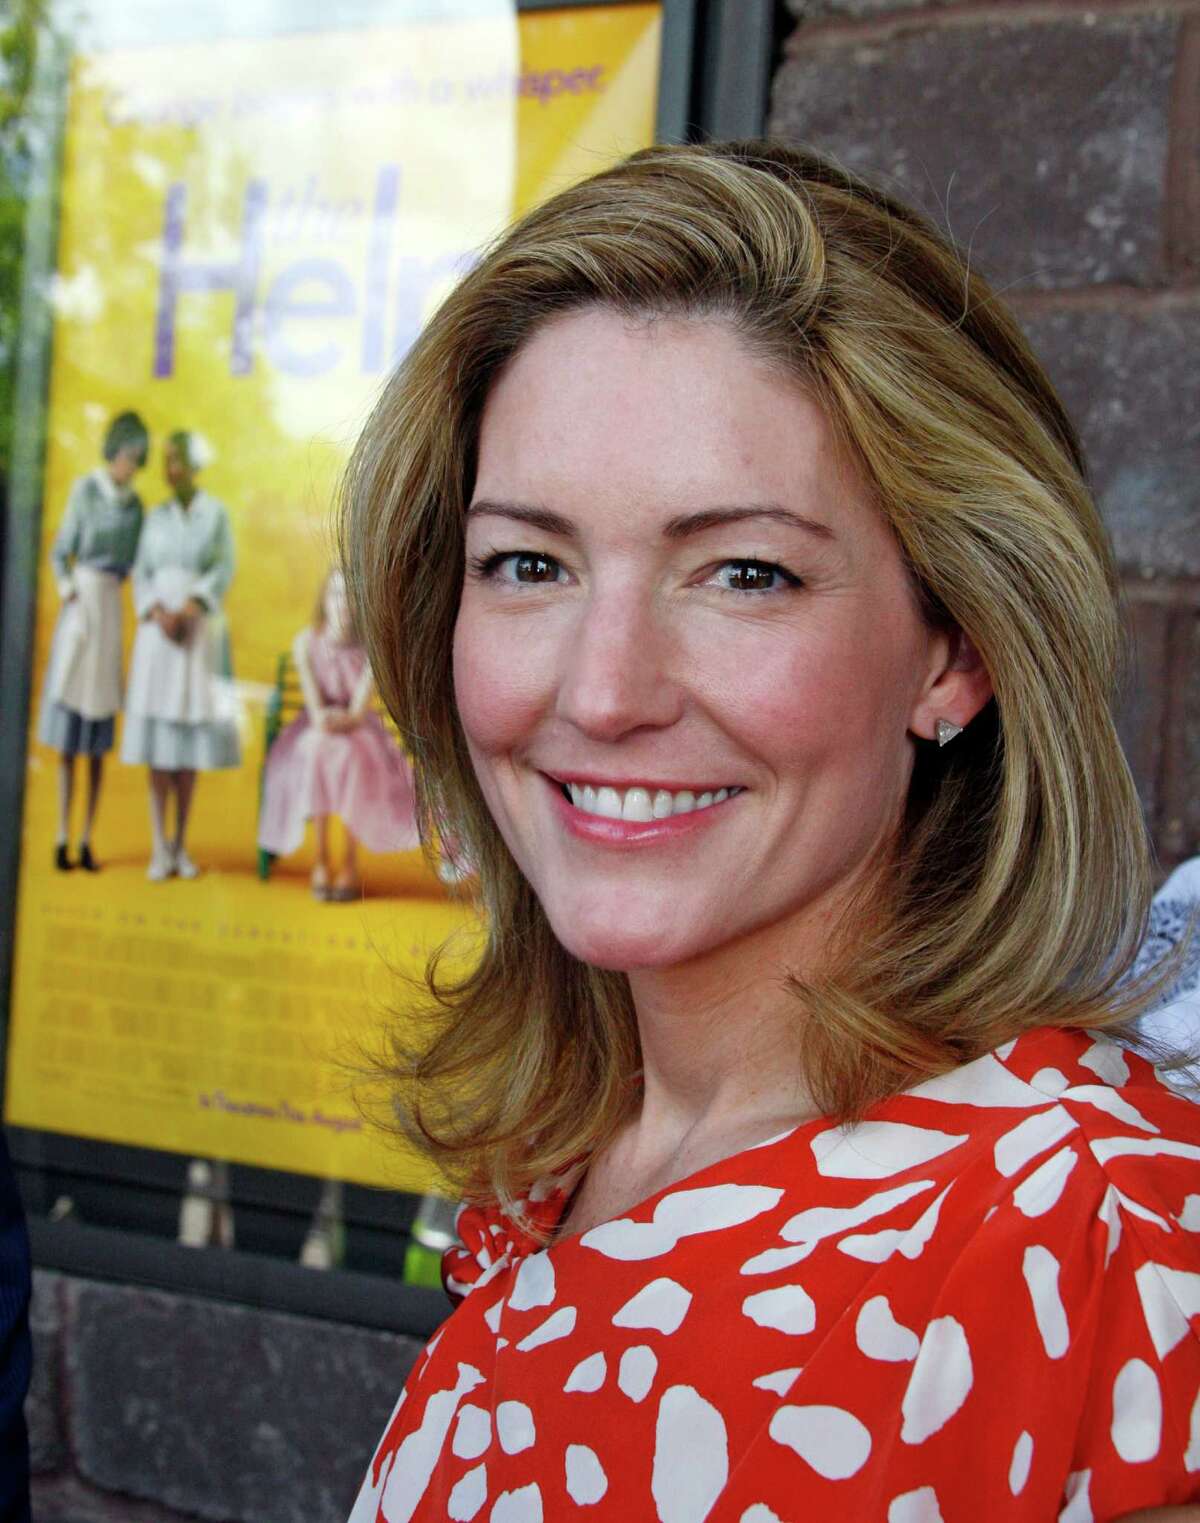 Author Kathryn Stockett poses by a poster for the movie made from her book prior to a benefit screening of "The Help" in Madison, Miss., Saturday, July 30, 2011. The film is based on the New York Times best-selling book by Stockett about the lives of three women in the 1960s Mississippi. (AP Photo/Rogelio V. Solis)